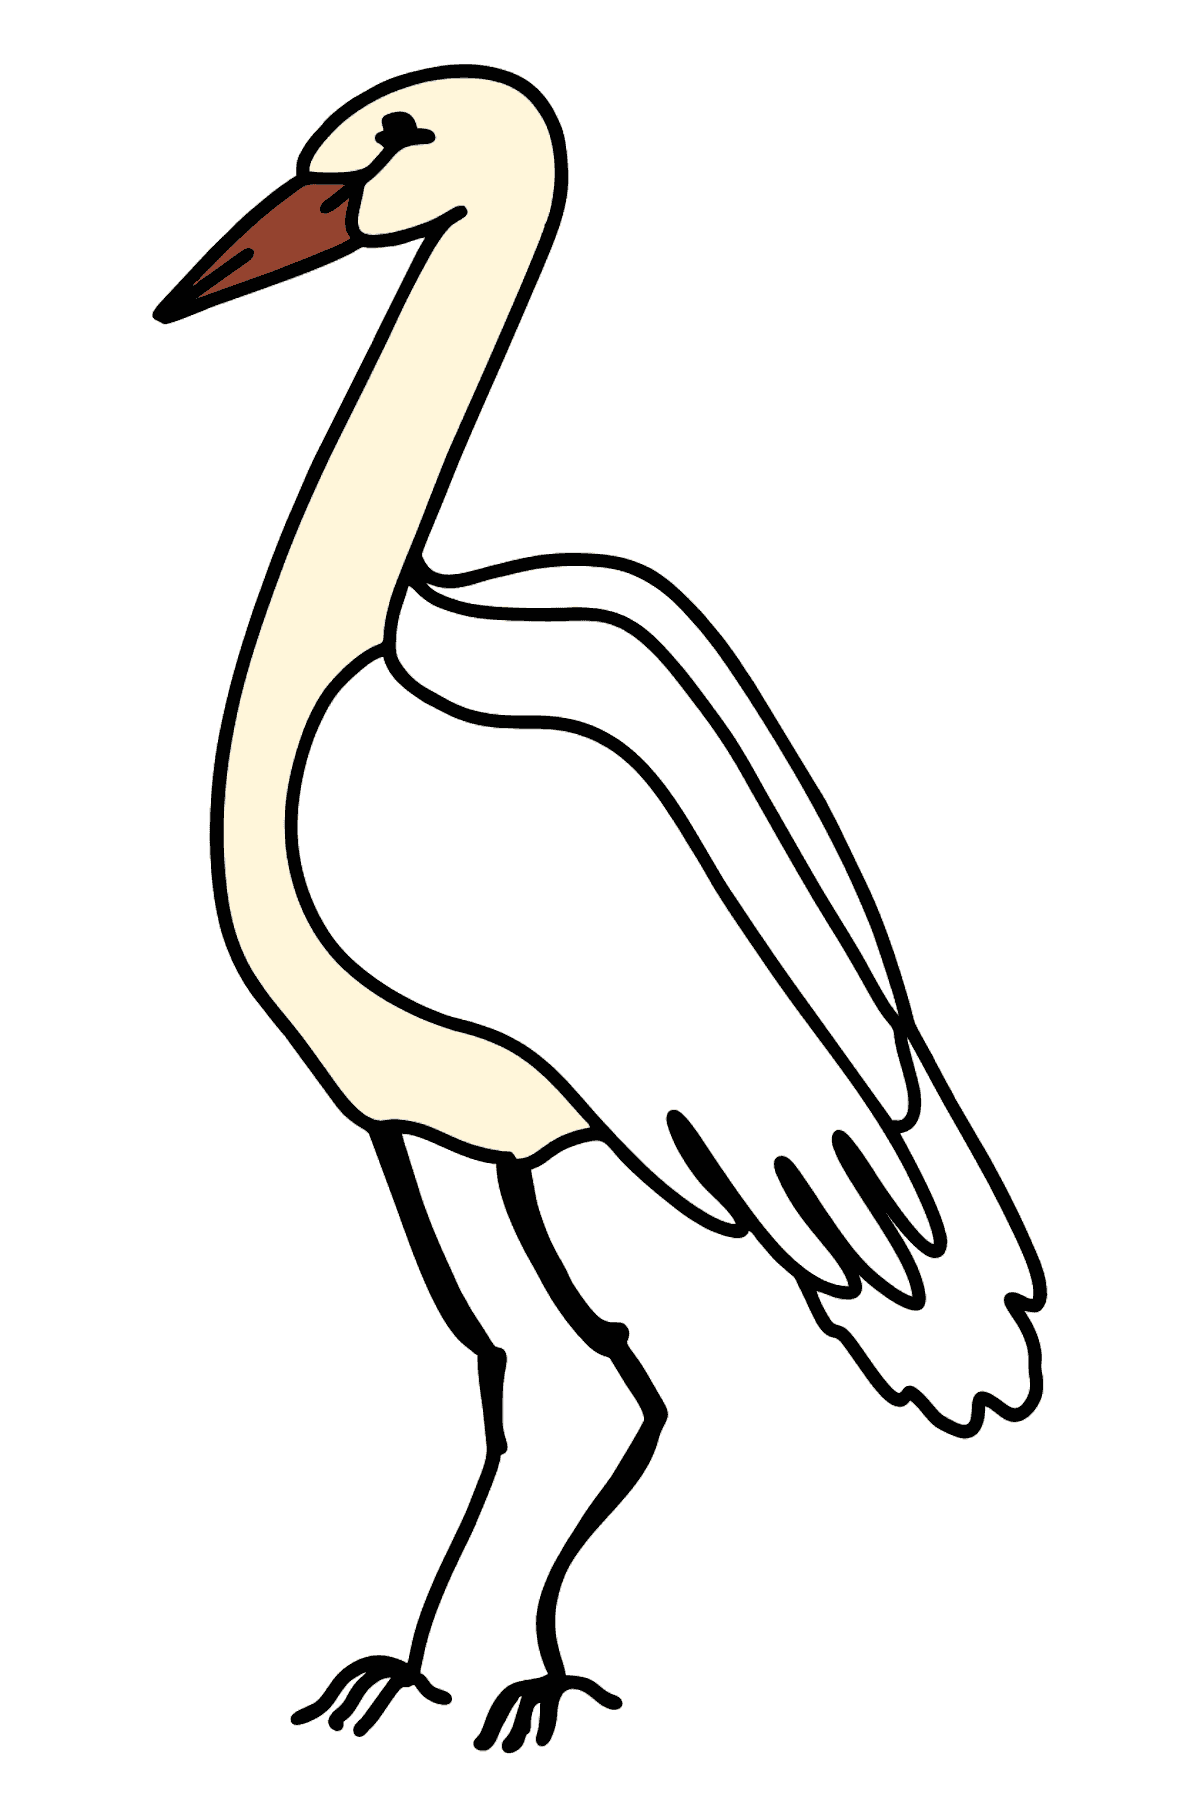 Simple coloring page with a stork  - Coloring Pages for Kids